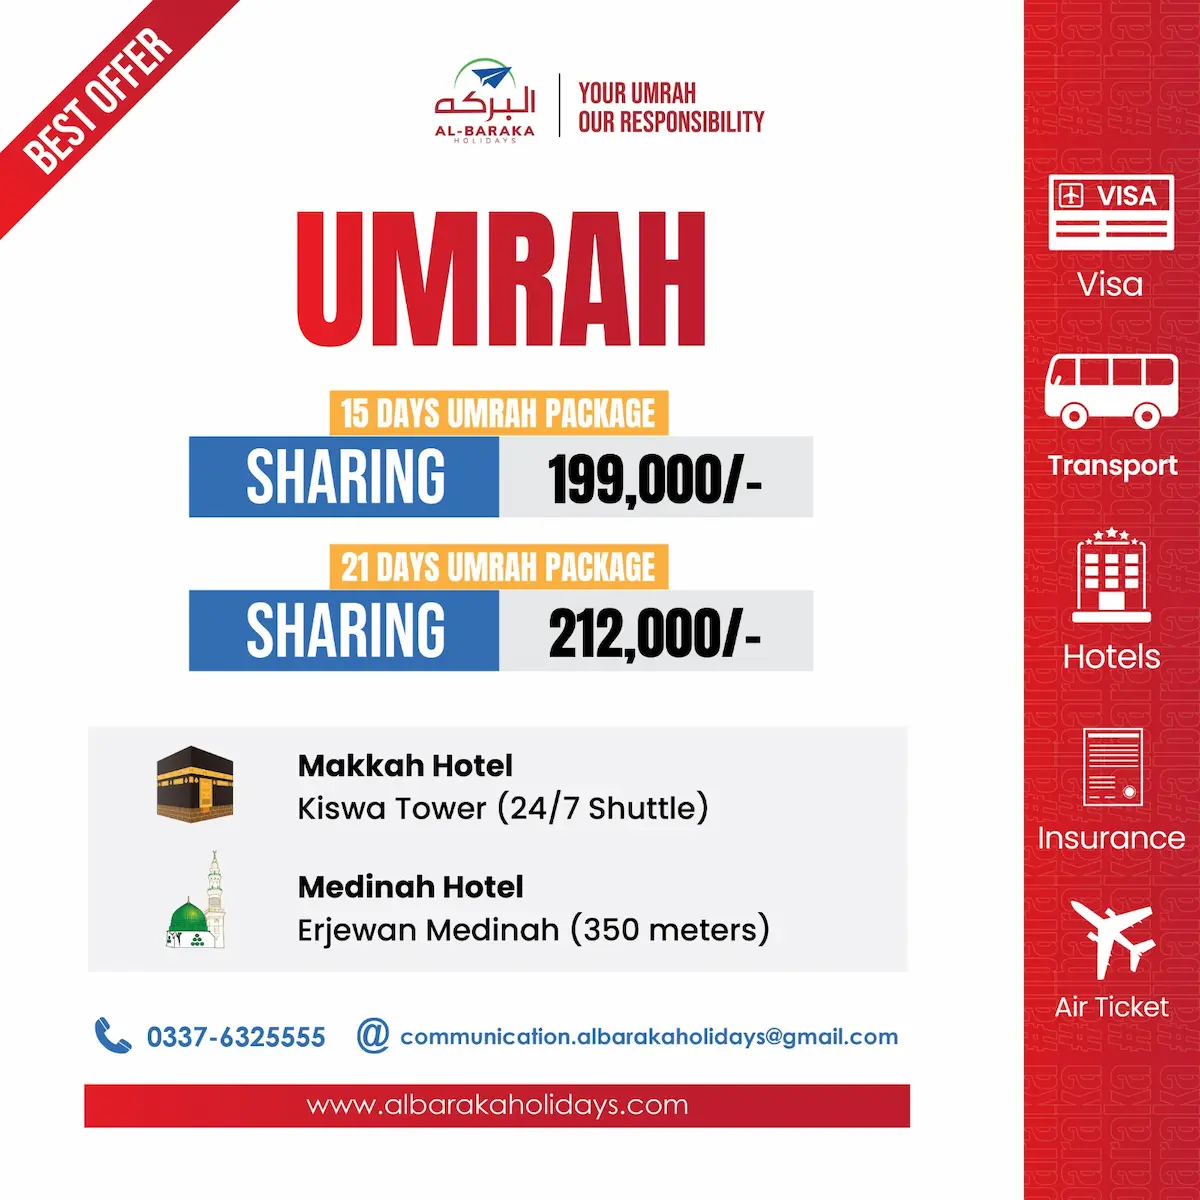 15 days Umrah package from Pakistan